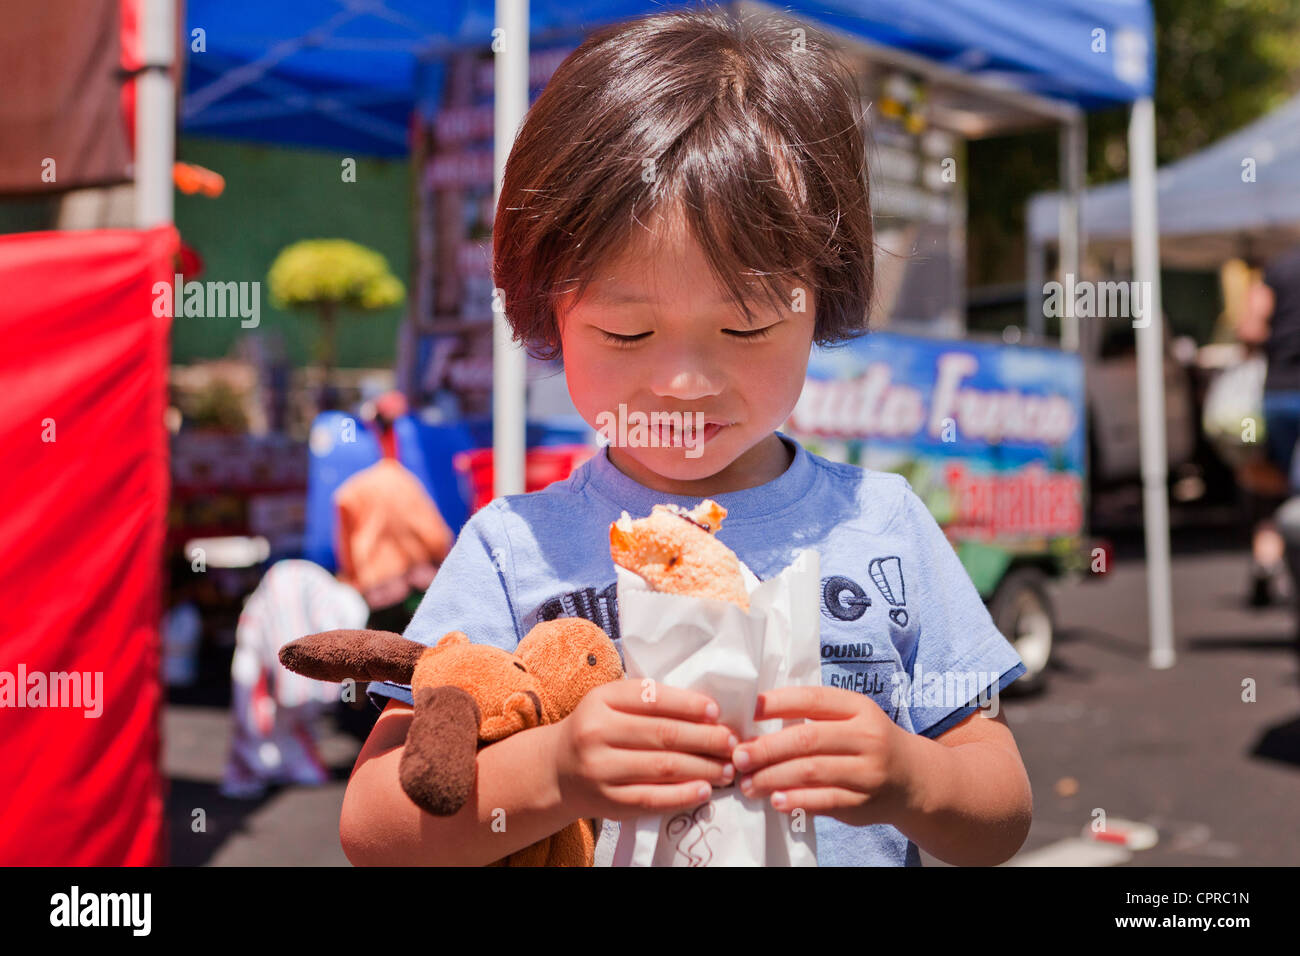 Young Asian boy eating a pastry au farmers market - Stockton, California USA Banque D'Images